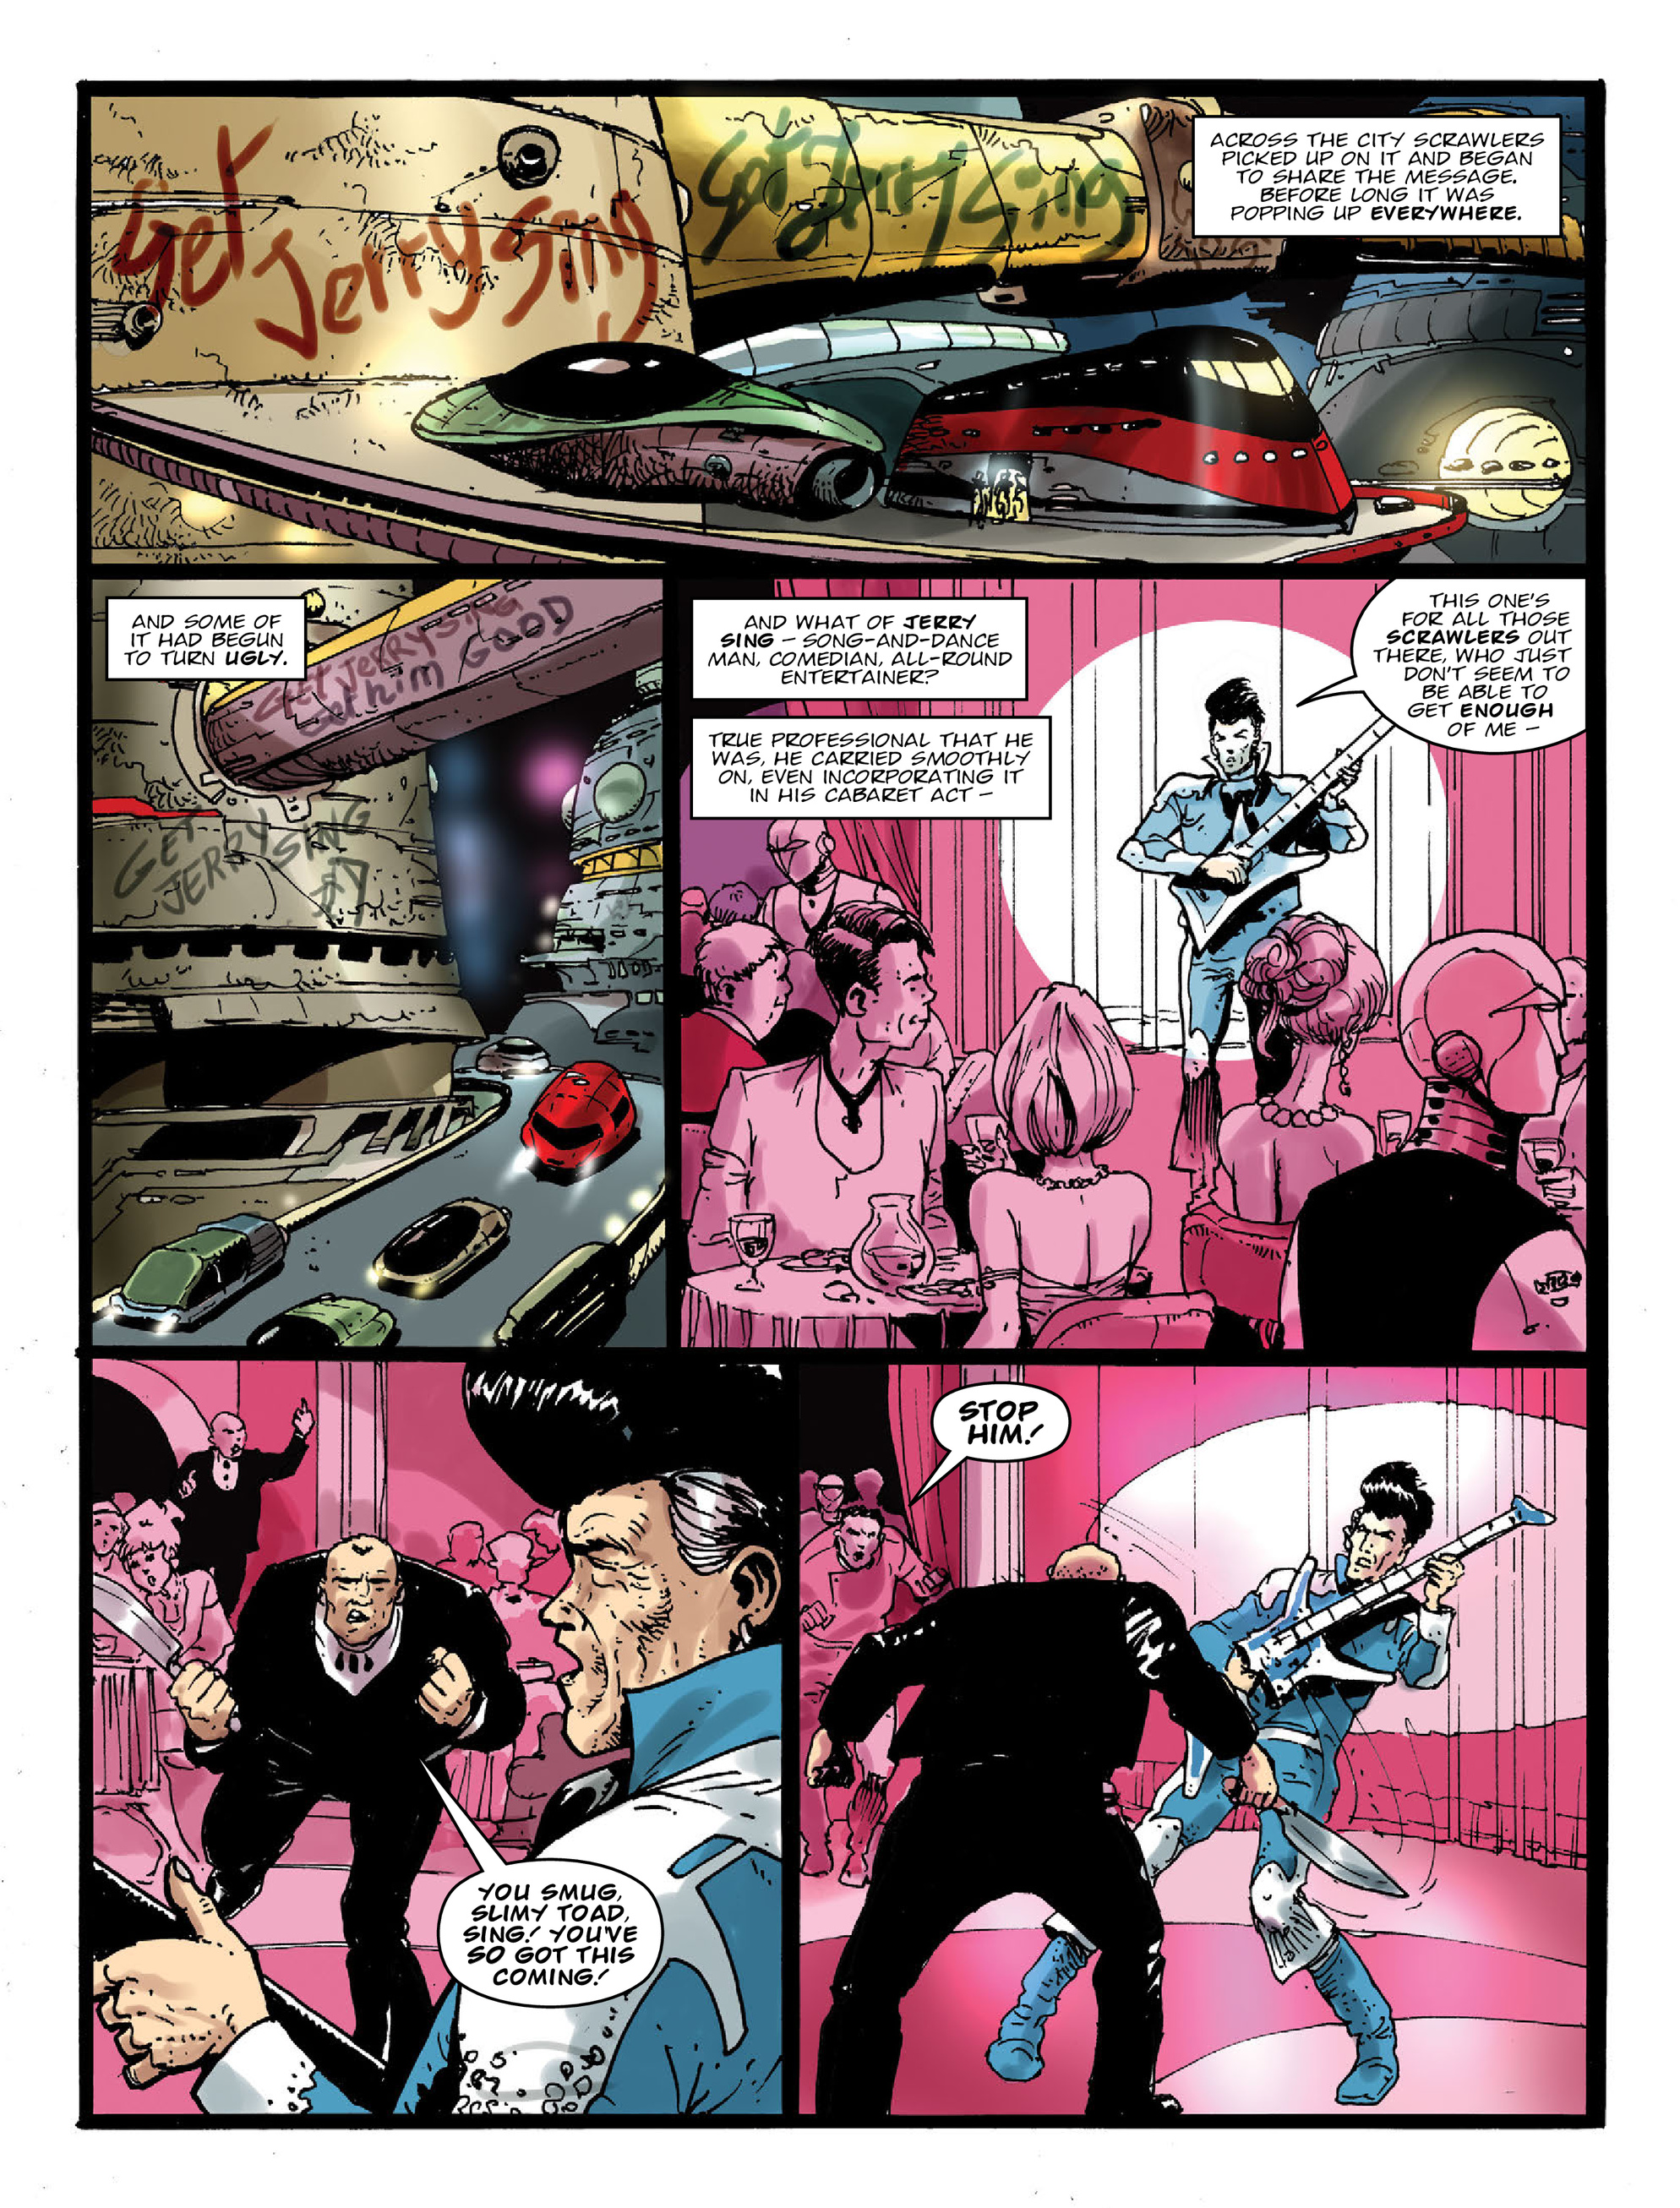 2000 AD: Chapter 2023 - Page 4